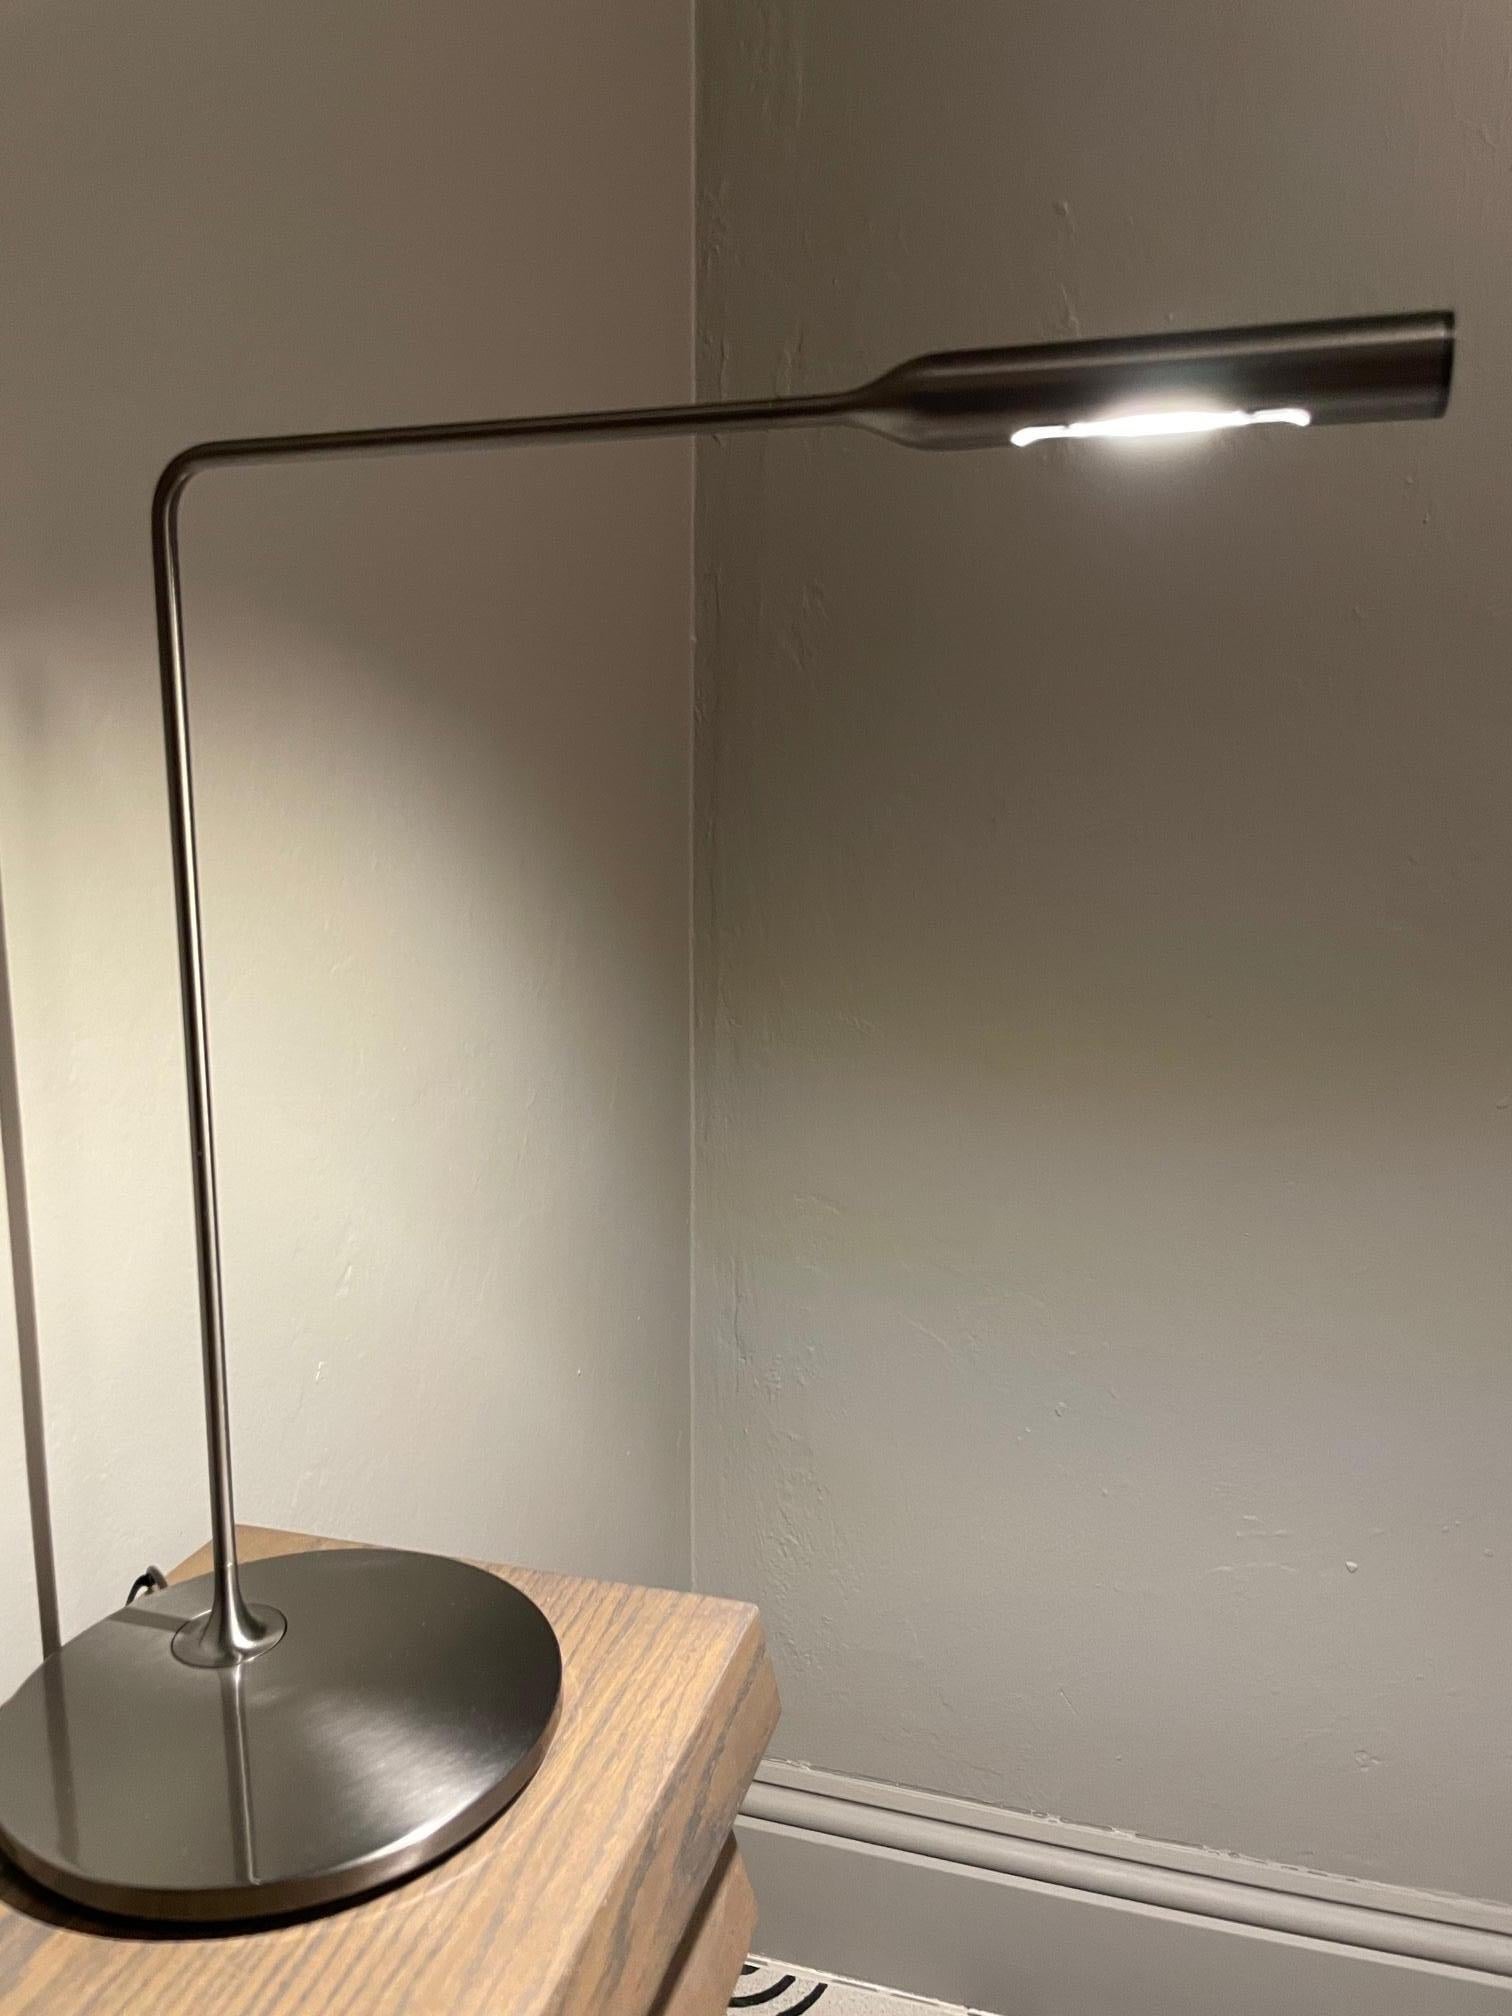 Flo desk
Foster and Partners
Task LED light in varnish coated aluminum and steel. Its head rotates by 300° for direct lighting, the arm pivots on base by 120°. 6W LED which you can switch on with one click for full light intensity, with two clicks